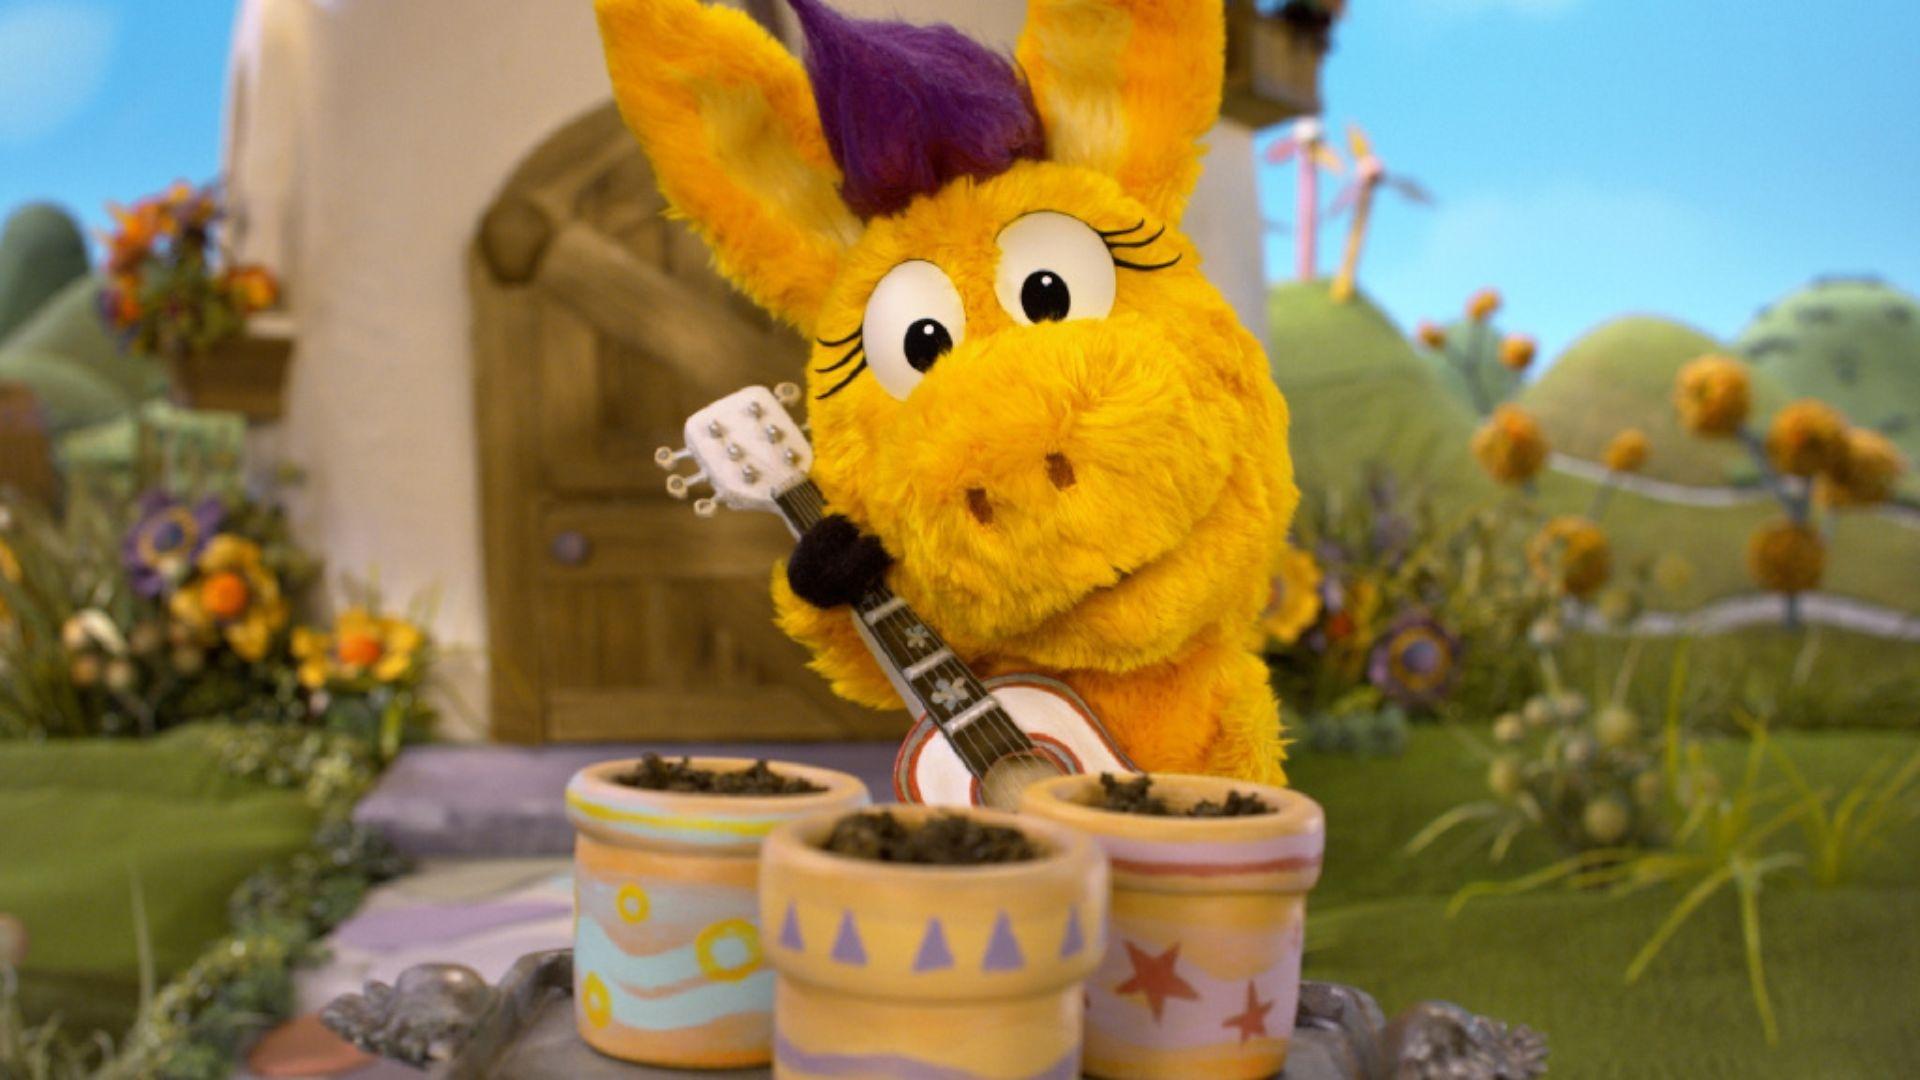 Donkey Hodie playing the guitar to some pots of soil.